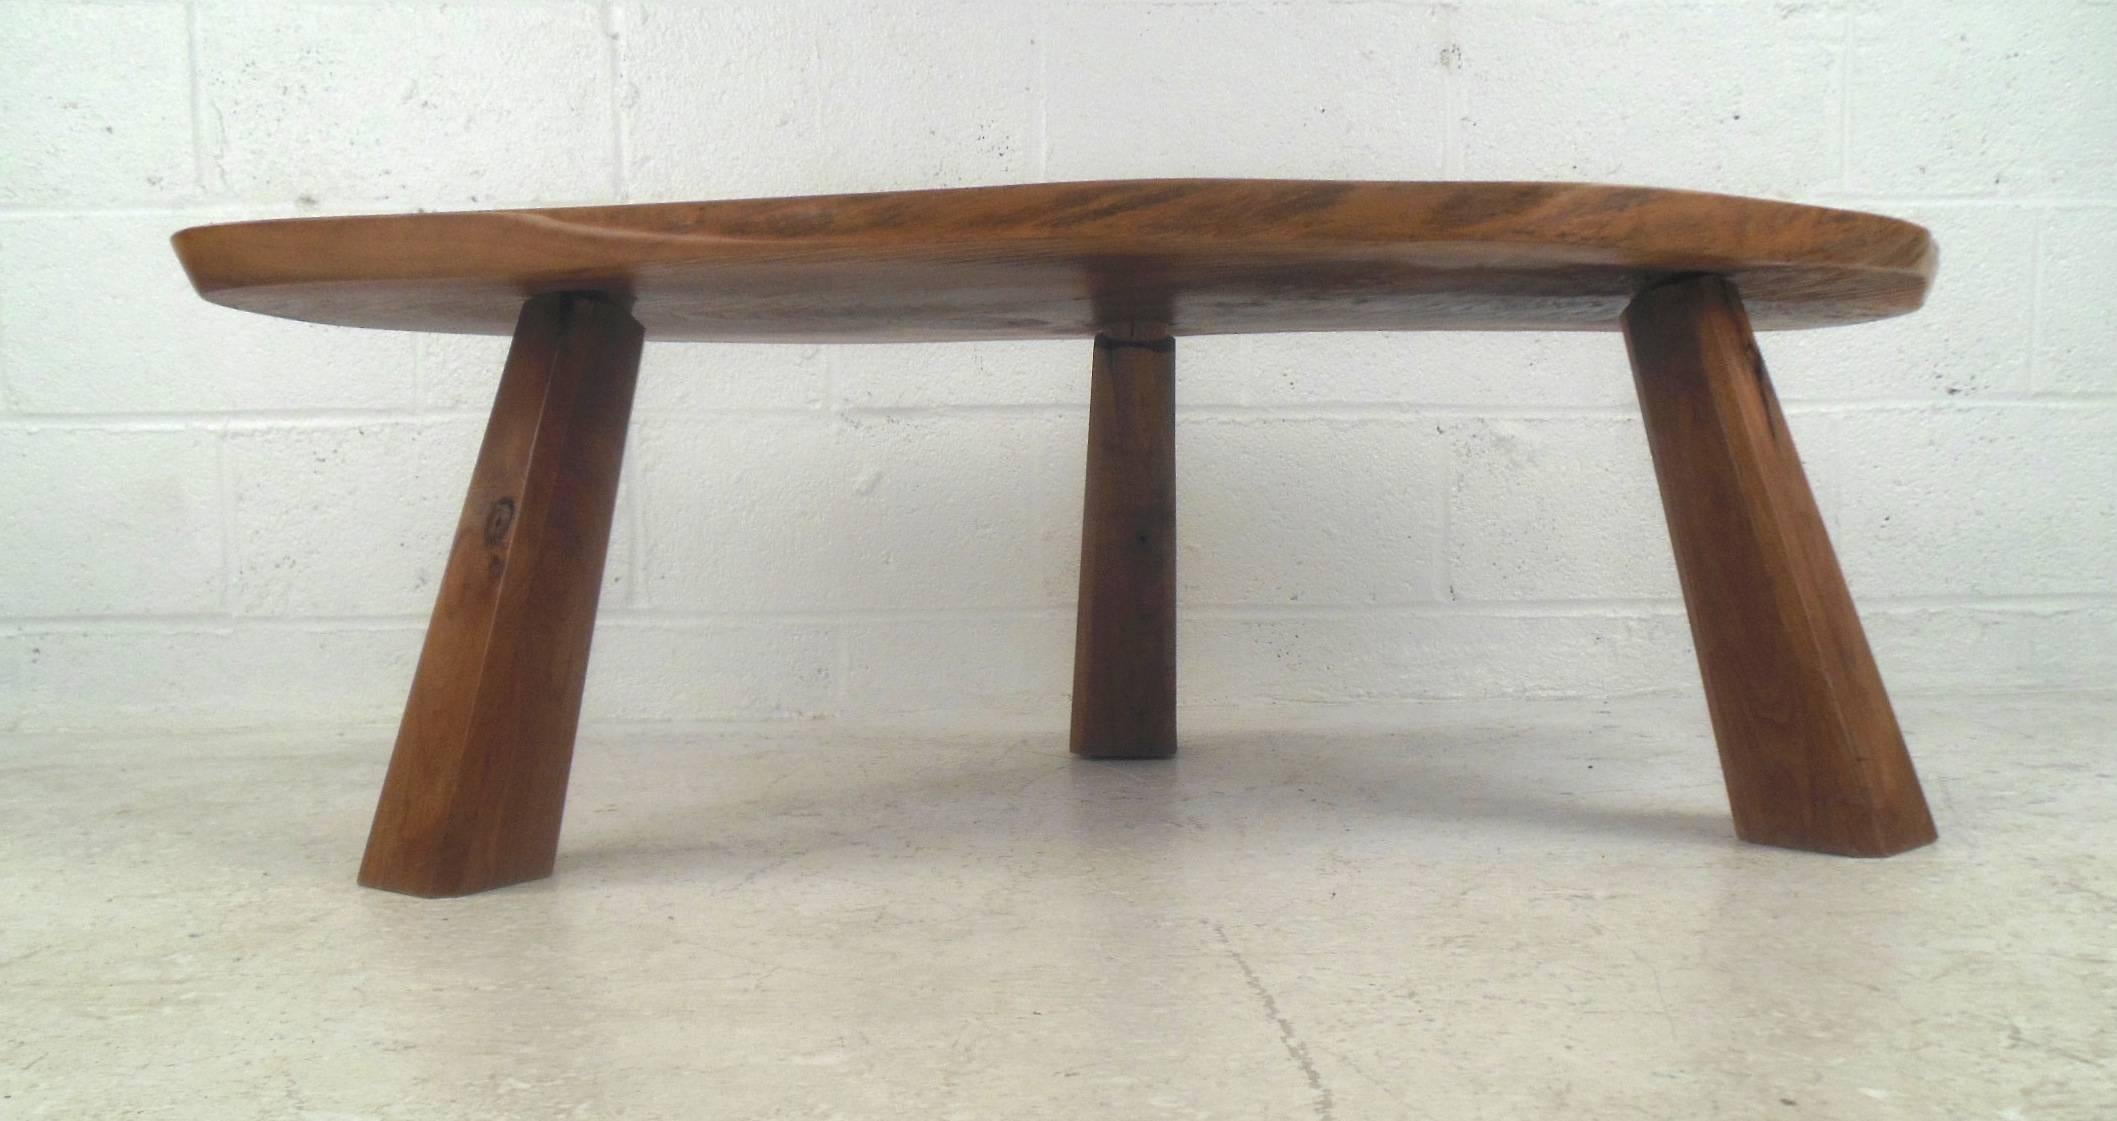 This beautiful vintage modern coffee table feature a unique tree slab top with elegant wood grain. Stylish design with thick wood legs that taper upward ensuring maximum sturdiness. This stunning live edge table offers a taste of nature within any